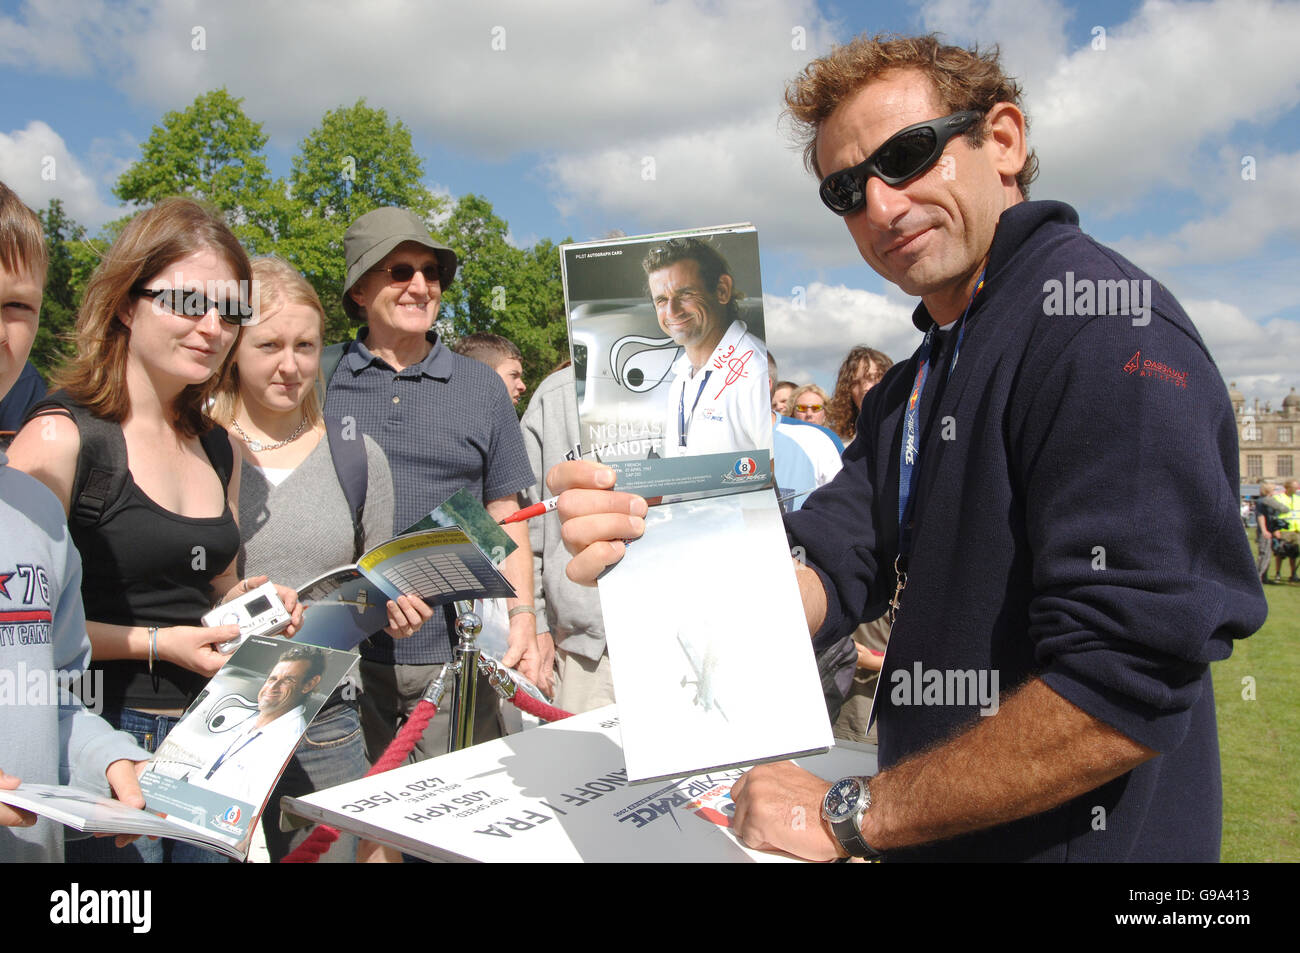 Red Bull Air Race World Series - Longleat House. Nicolas Ivanoff meets some fans Stock Photo